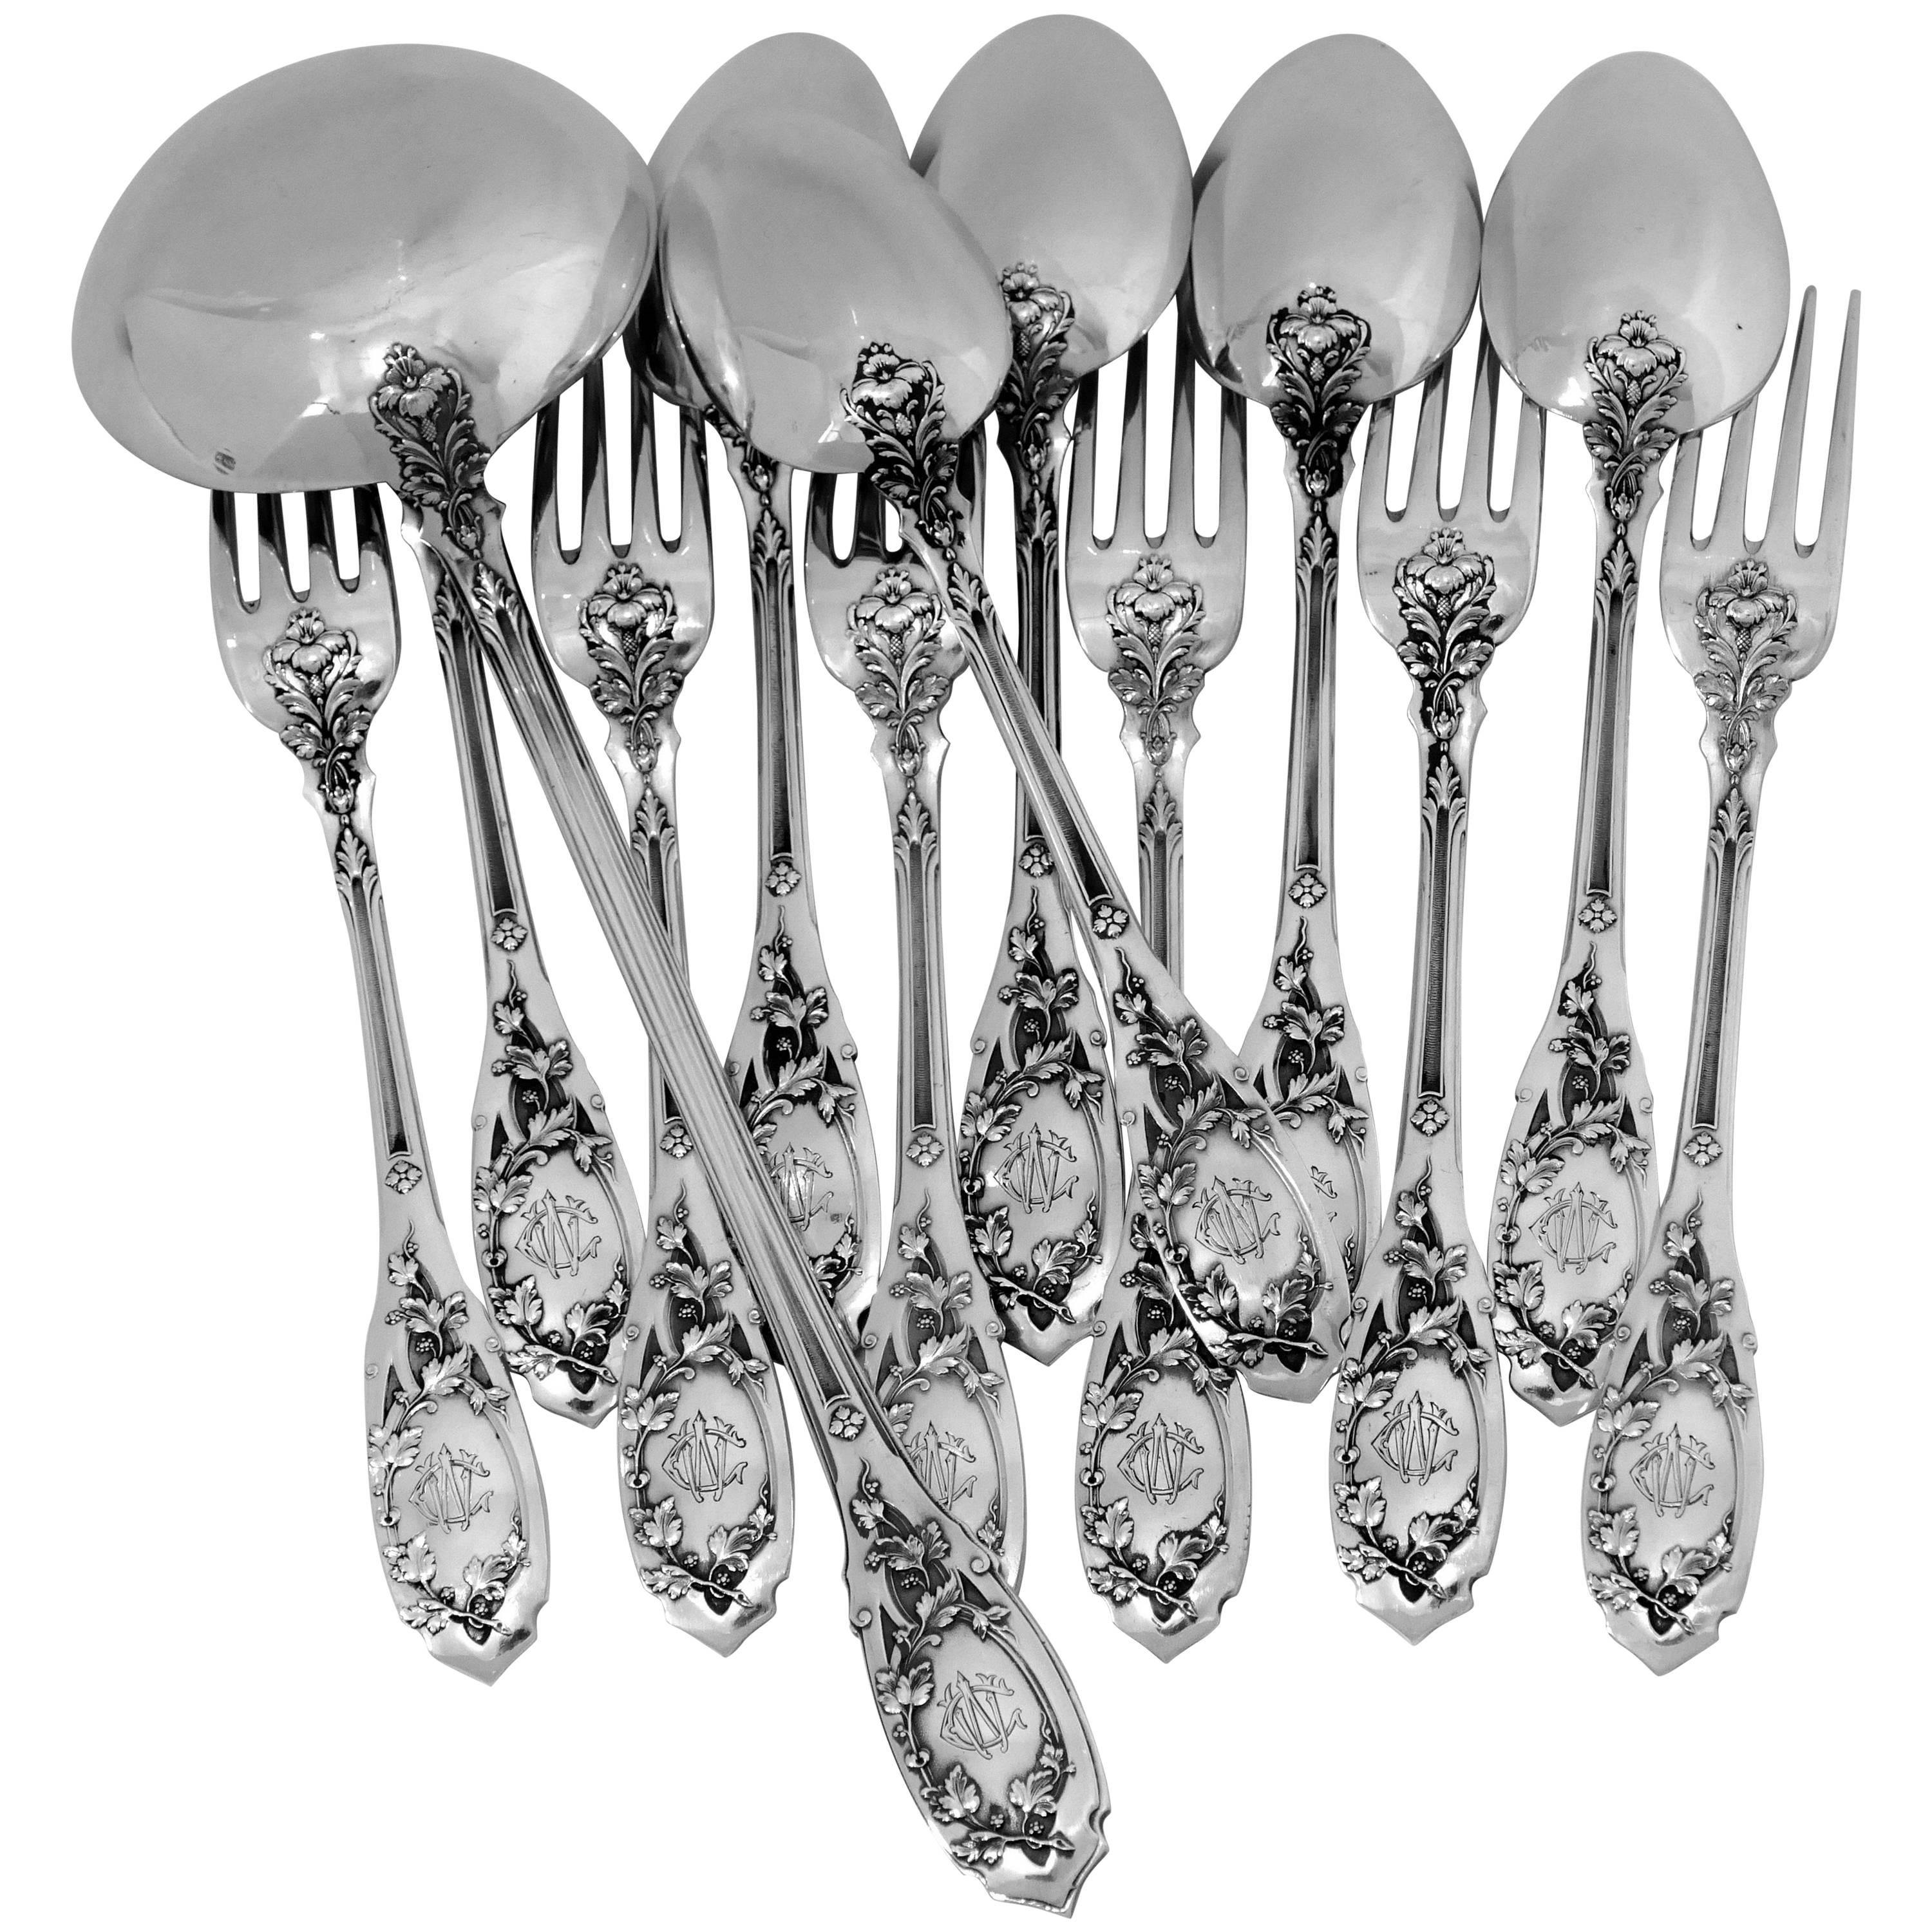 Puiforcat French Sterling Silver Dinner Flatware Set 12 Pc with Ladle, Moderne For Sale